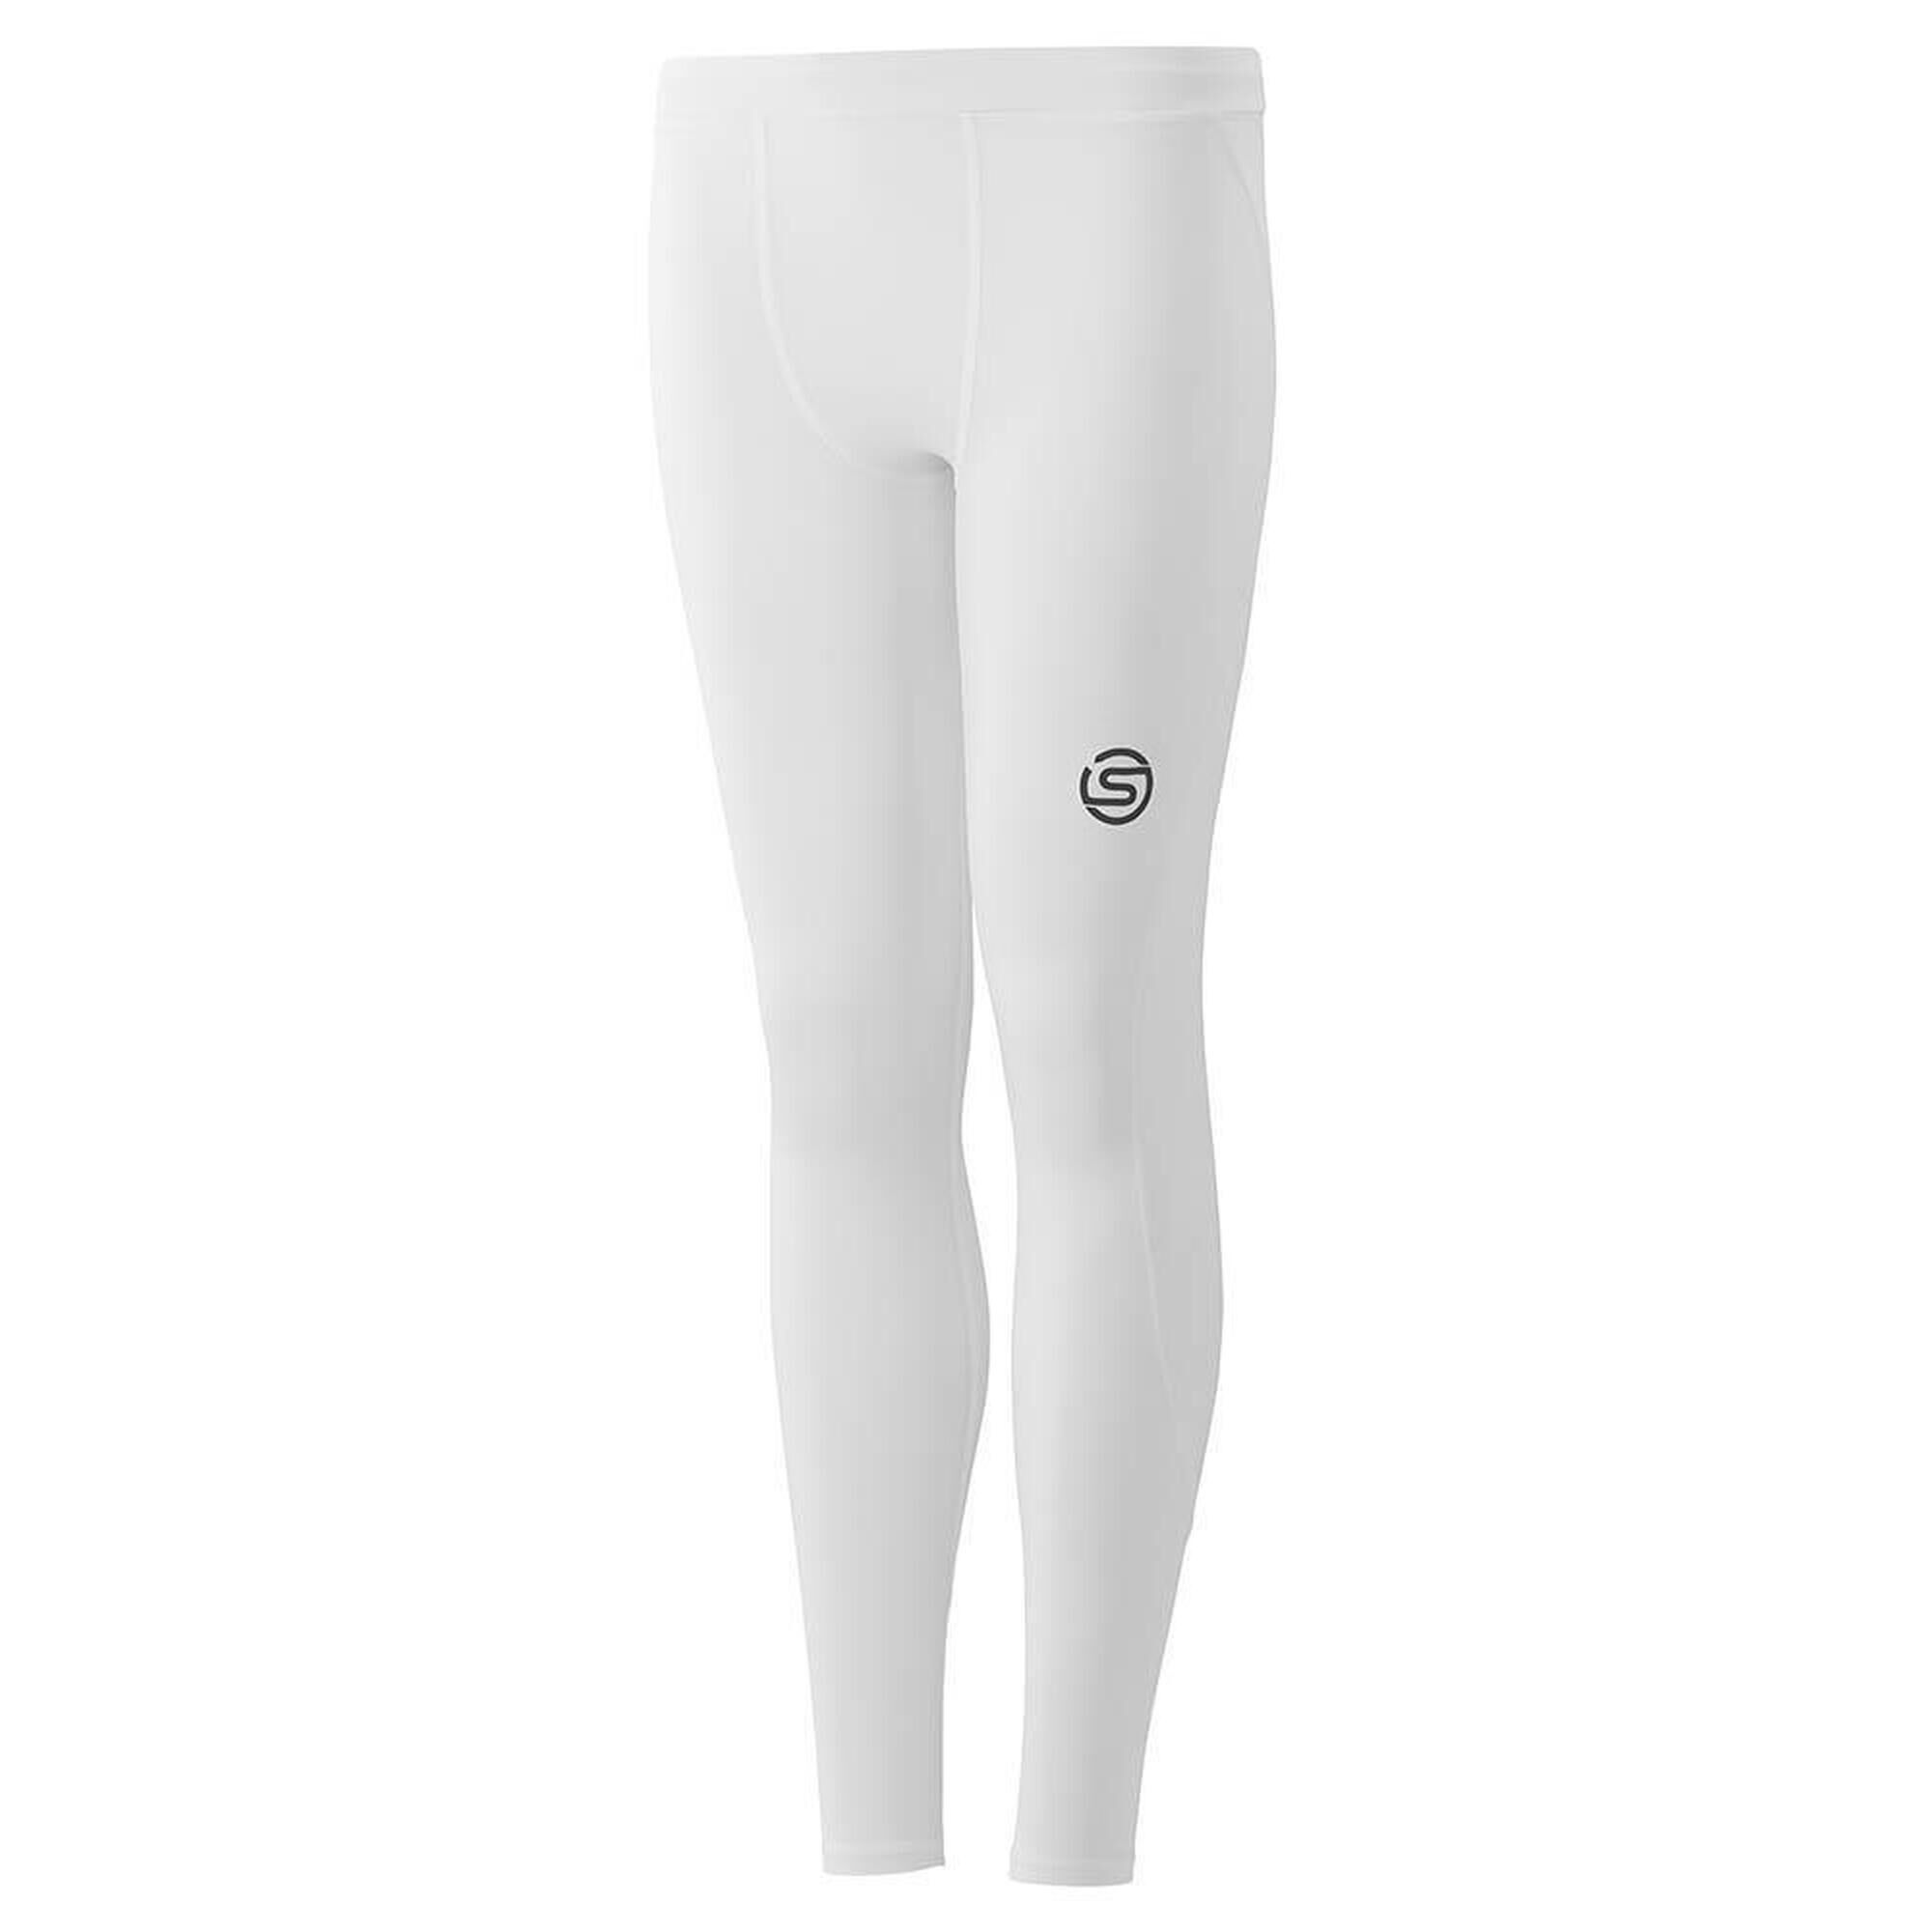 SKINS SKINS Series-1 Youth Tight - White - Size L